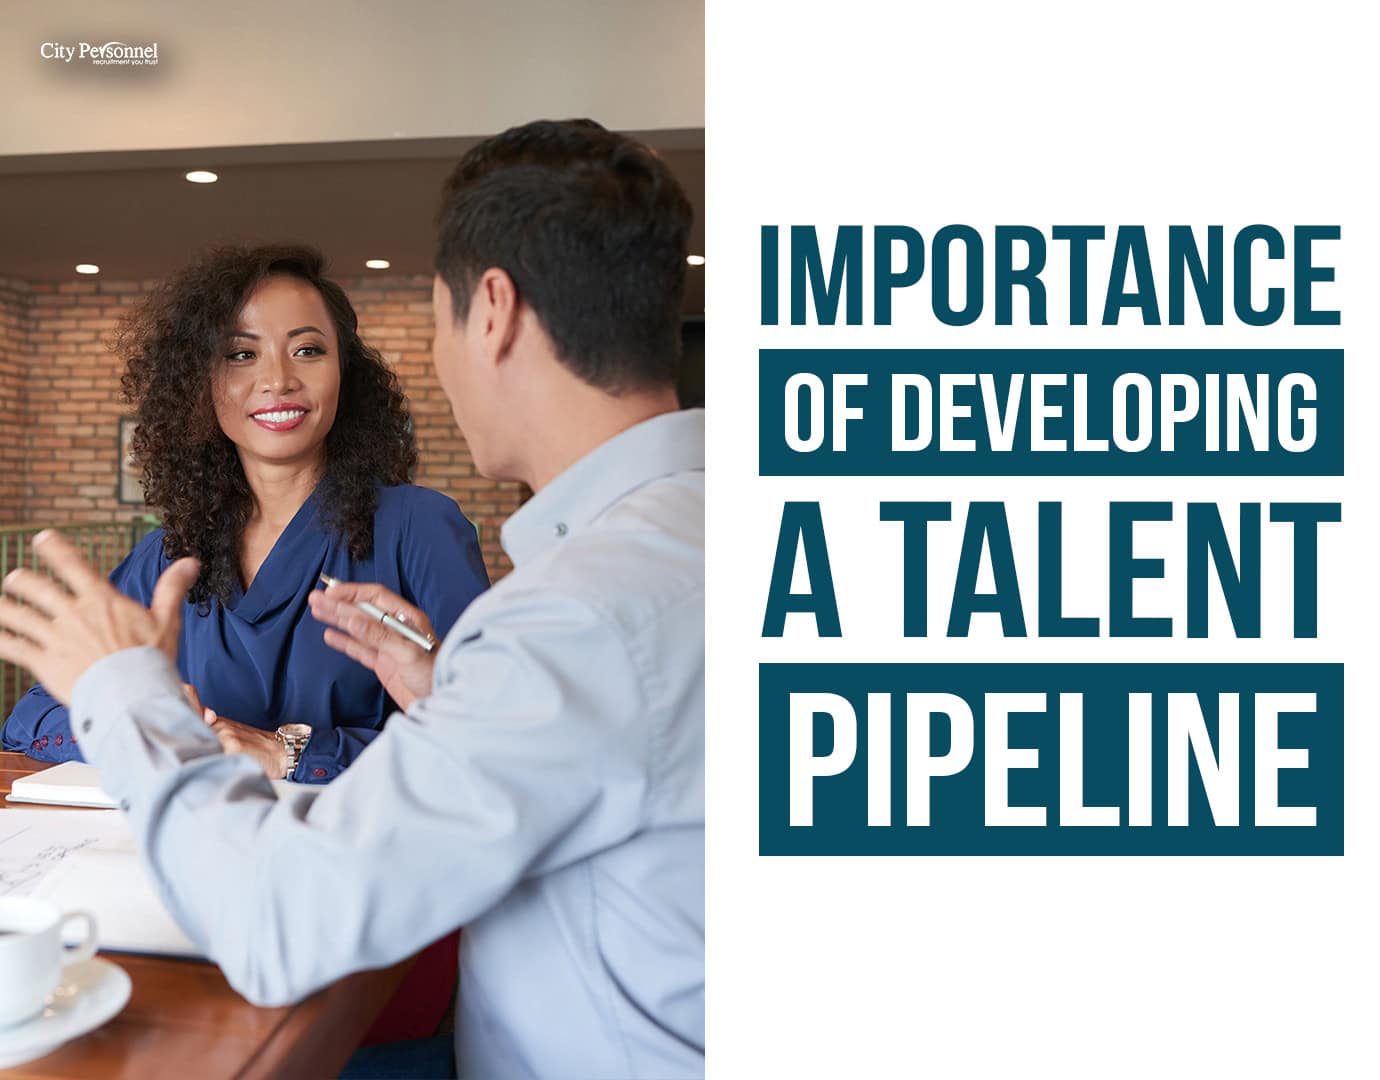 Importance of Developing a Talent Pipeline